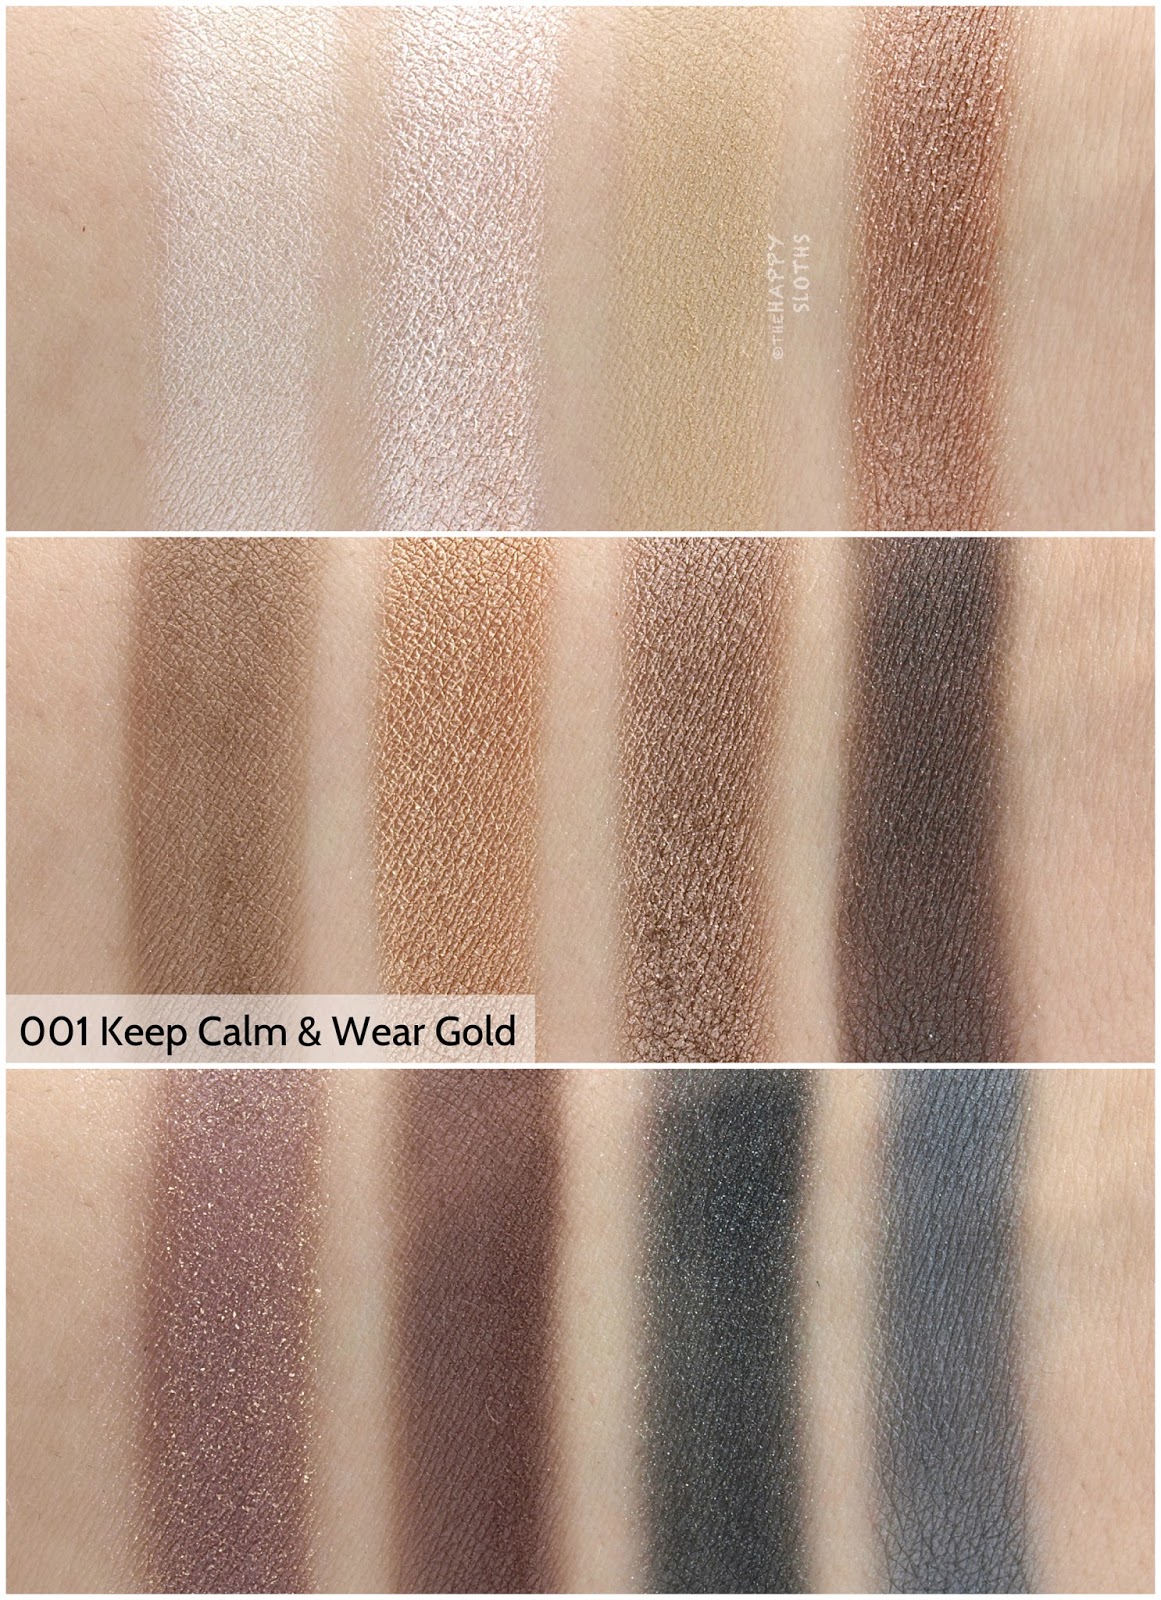 Rimmel London Magnif'eyes Eyeshadow Contouring Palette in "001 Keep Calm & Wear Gold": Review and Swatches